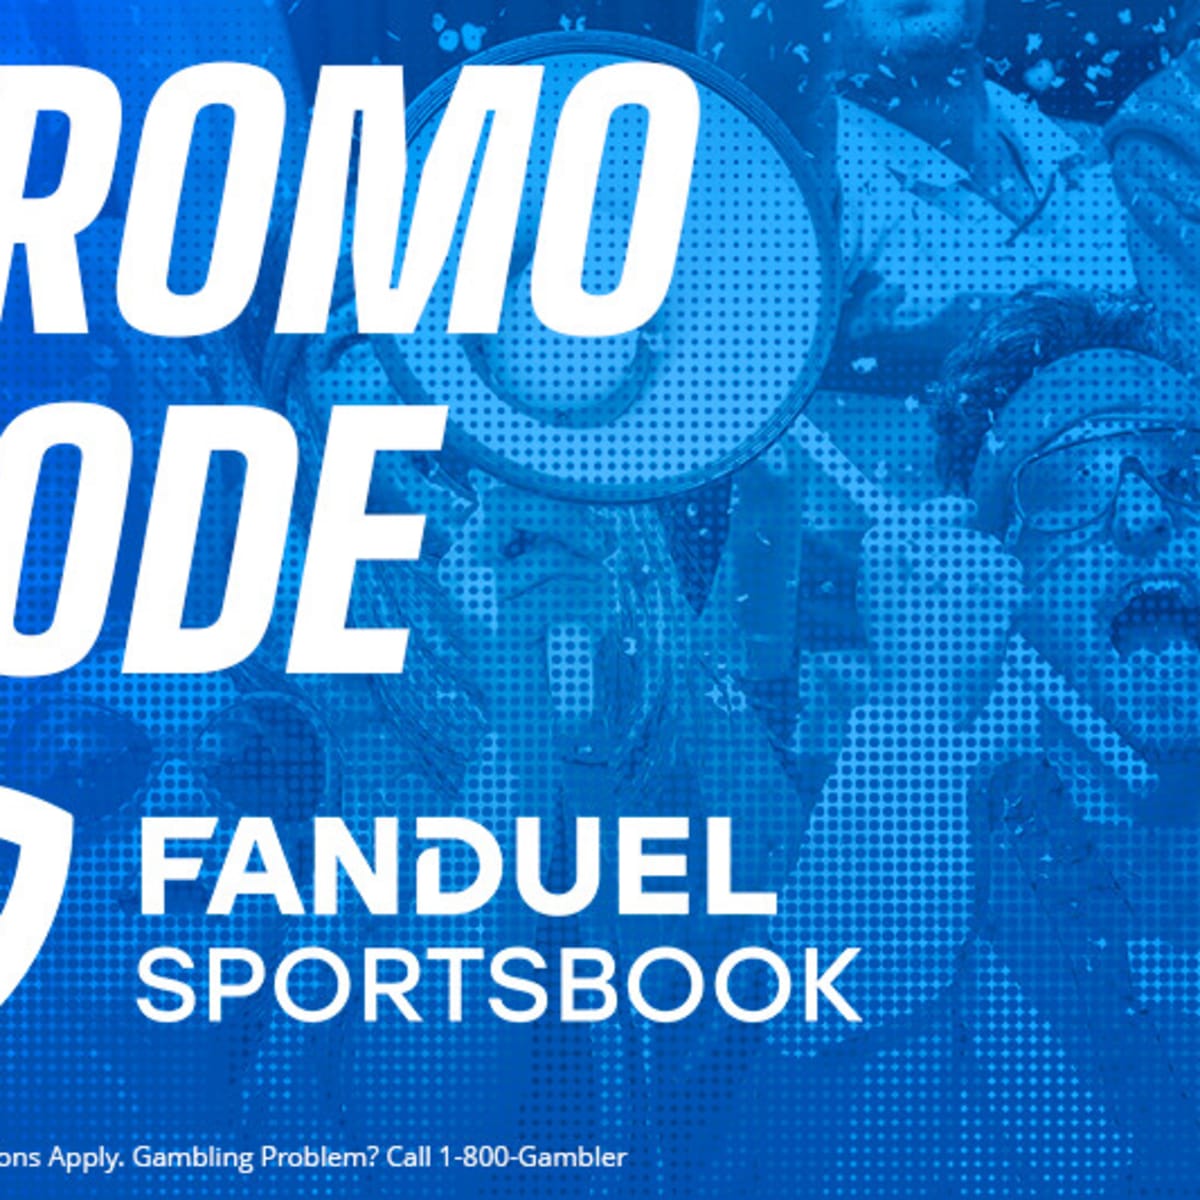 FanDuel Promo Code Gives 30-1 Odds on Any NFL Wild Card Game